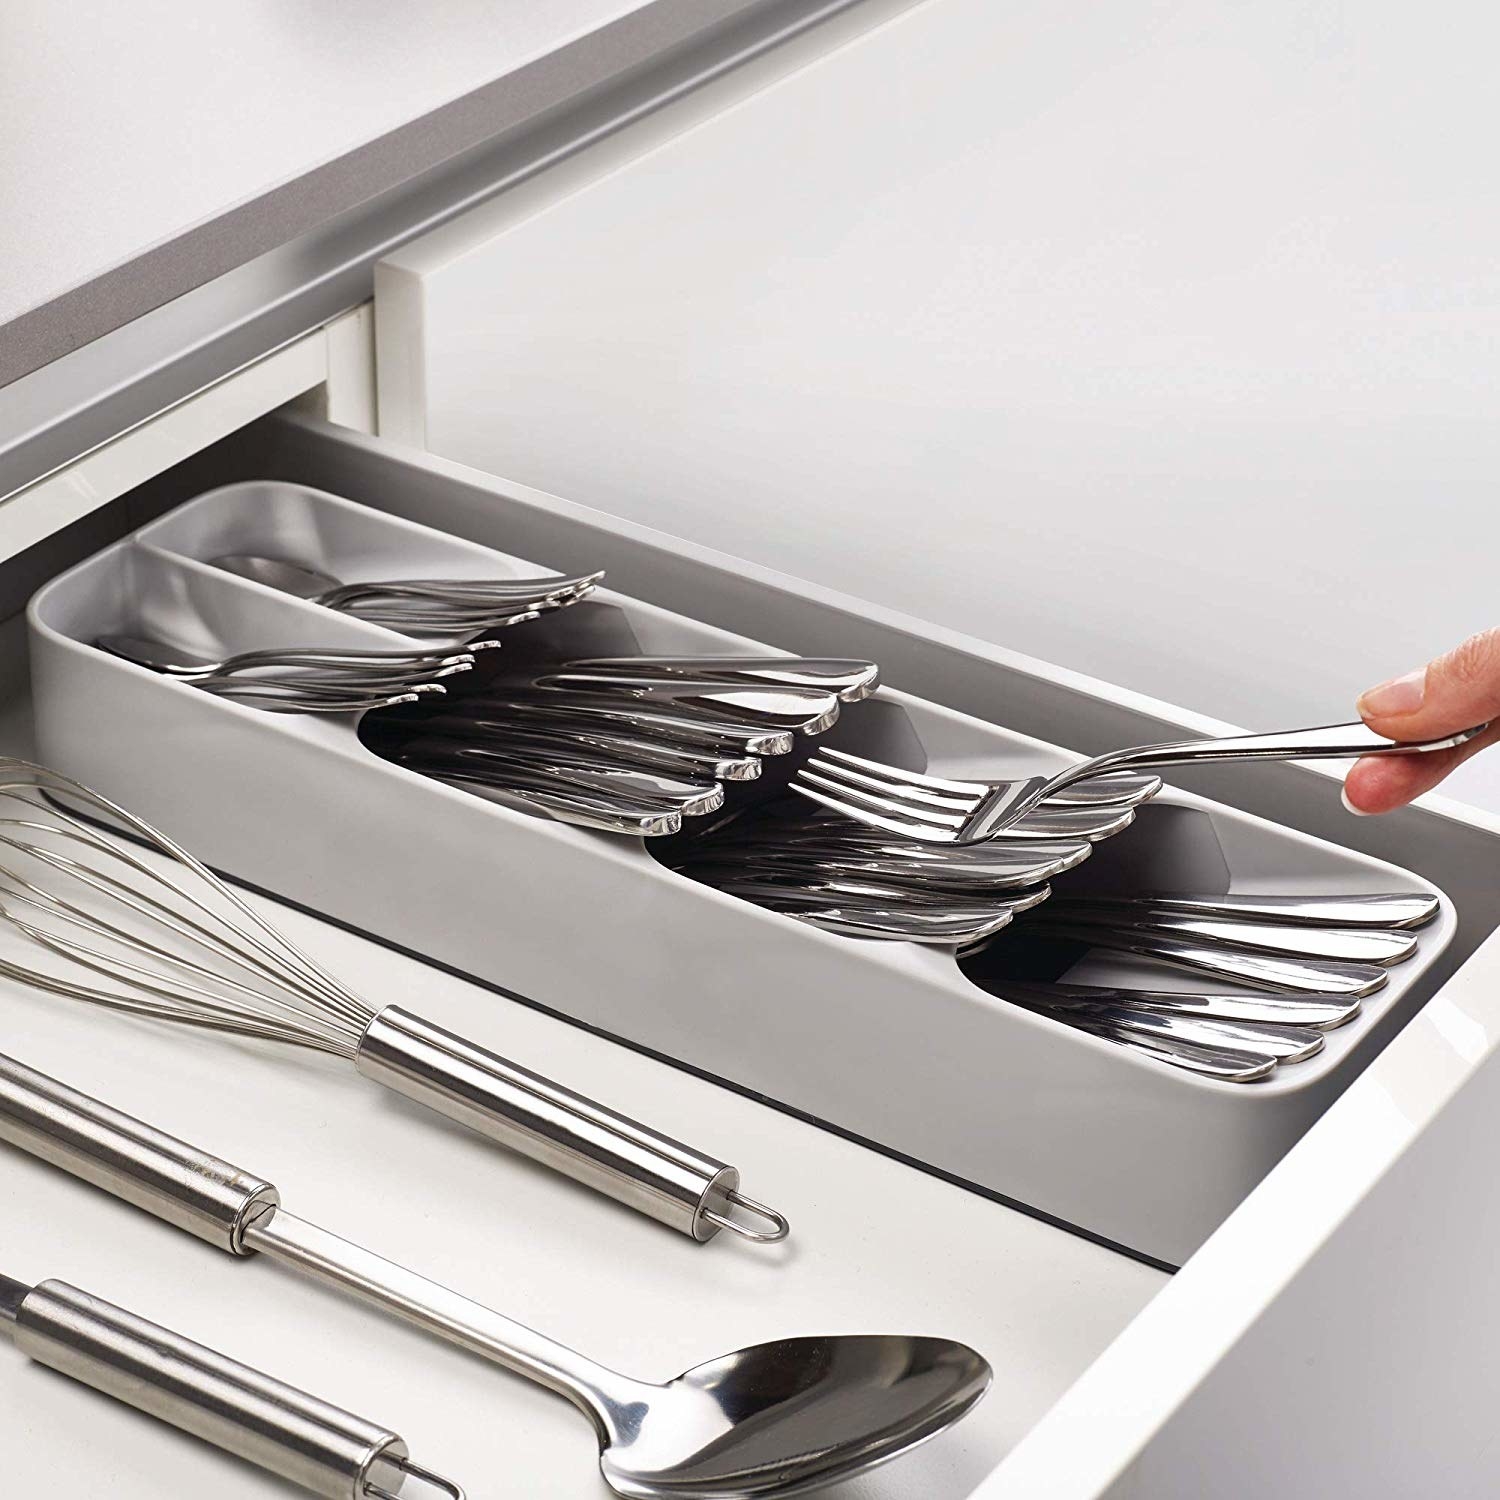 open kitchen drawer with the slim utensil holder fitting lots of silverware, leaving room for larger kitchen utensils in the rest of the drawer